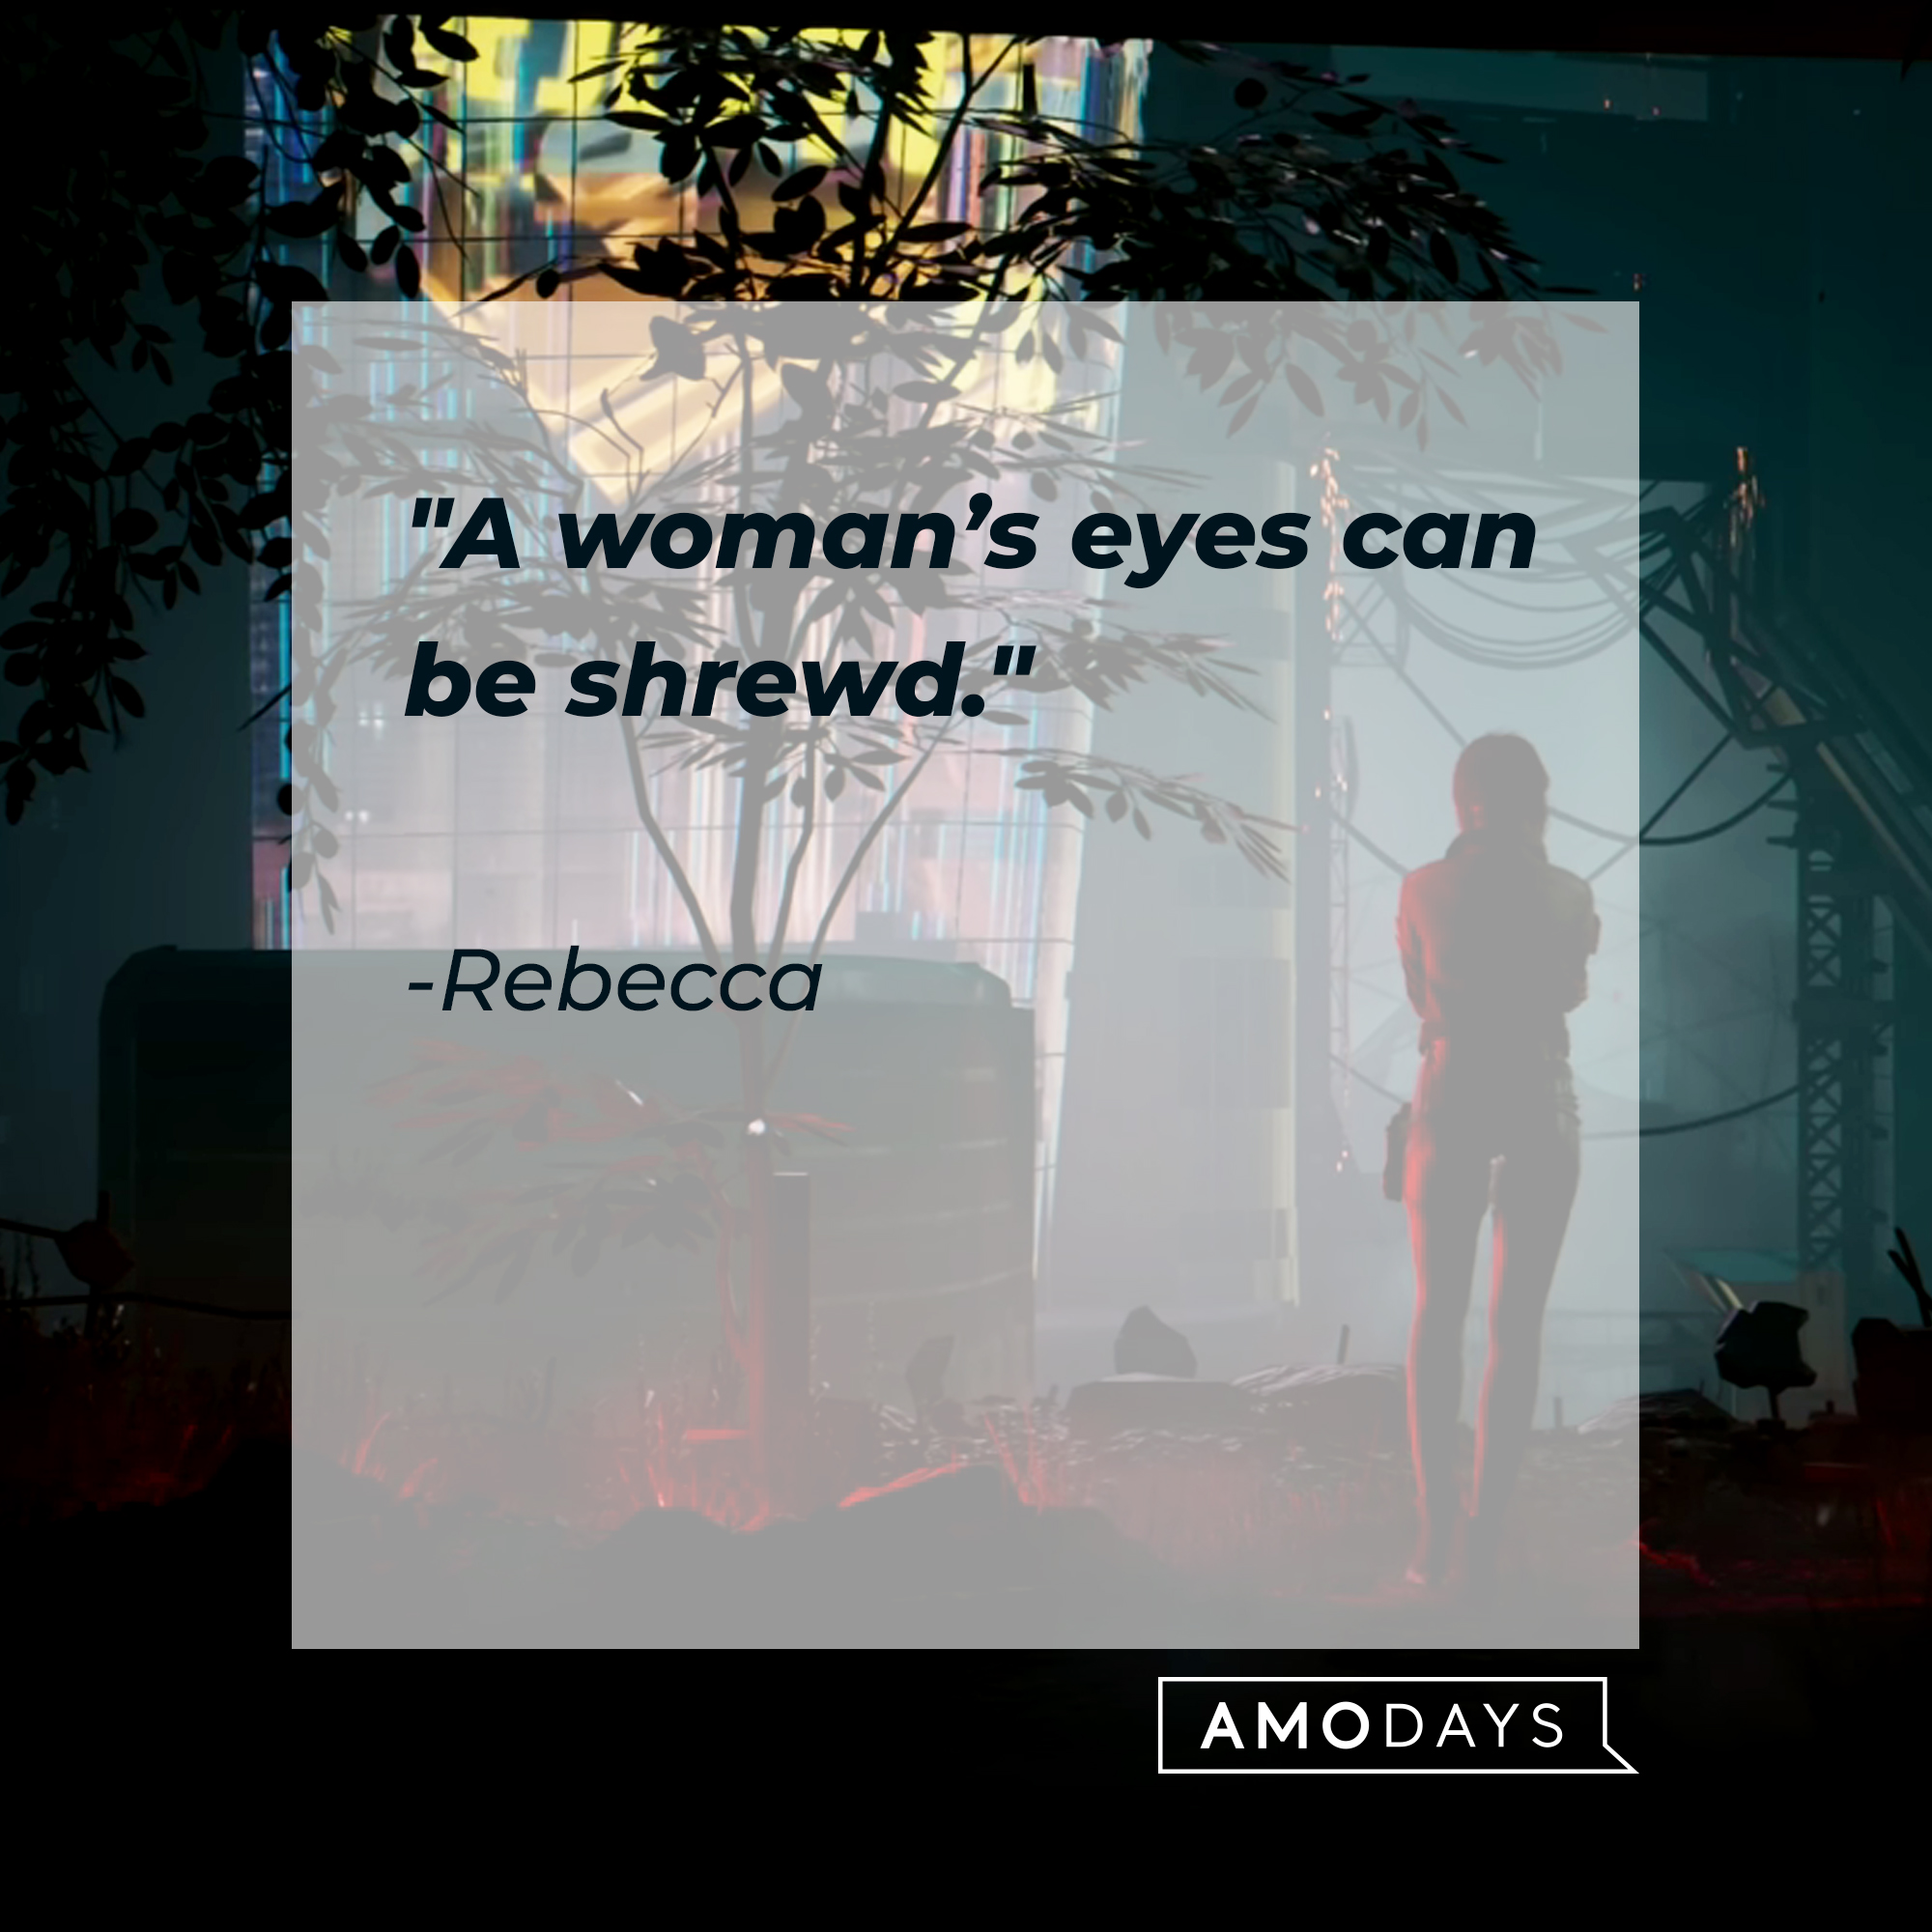 Rebeccas’s quote: "A woman’s eyes can be shrewd." | Source: Youtube.com/CyberpunkGame